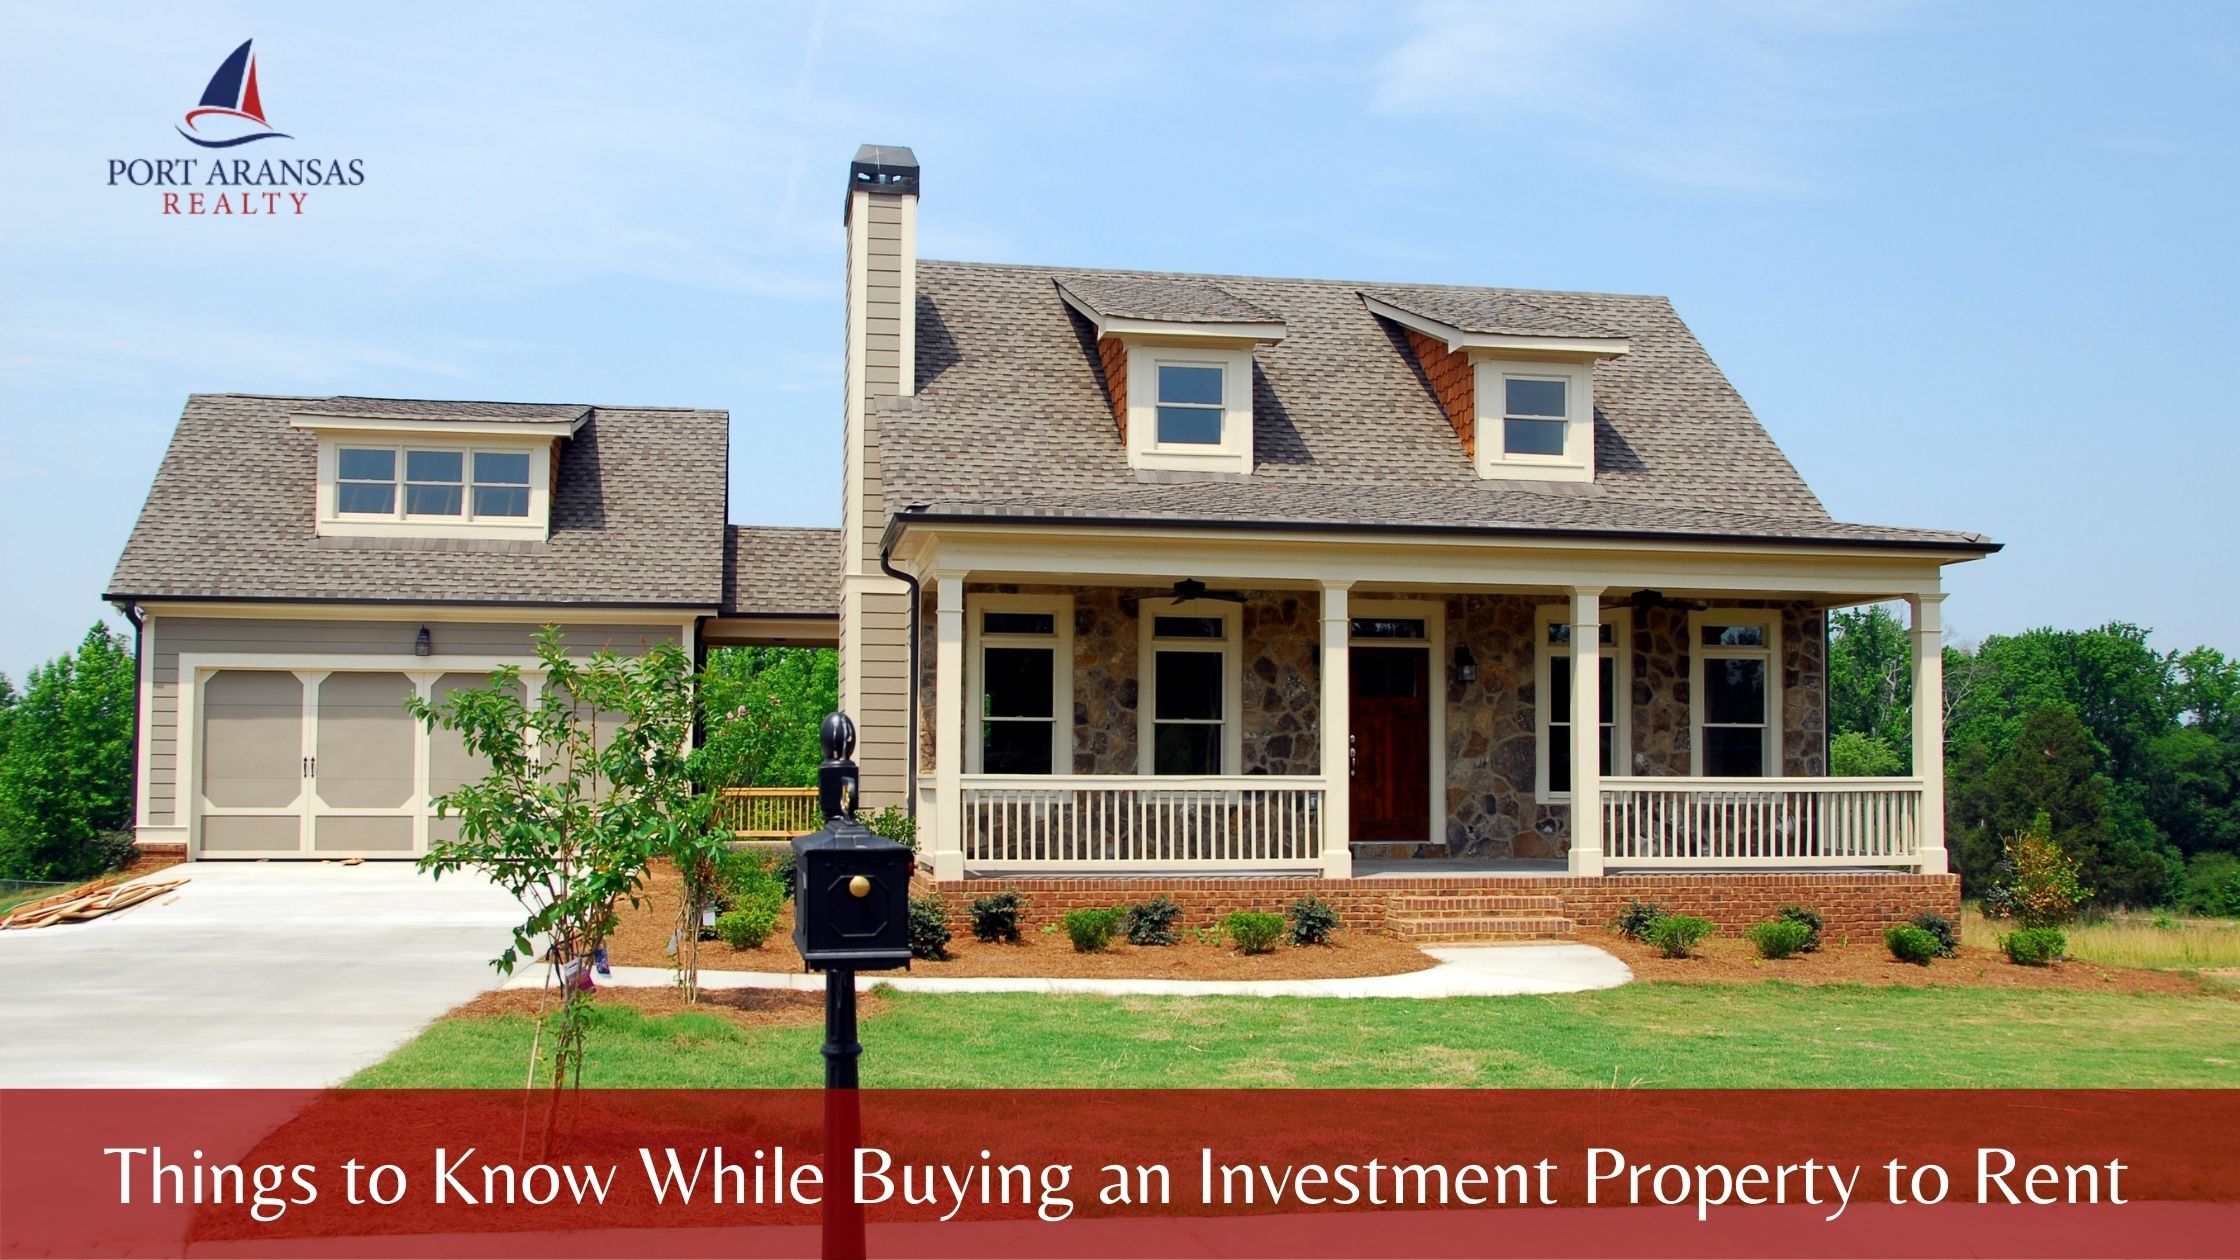 Things to Know While Buying an Investment Property to Rent